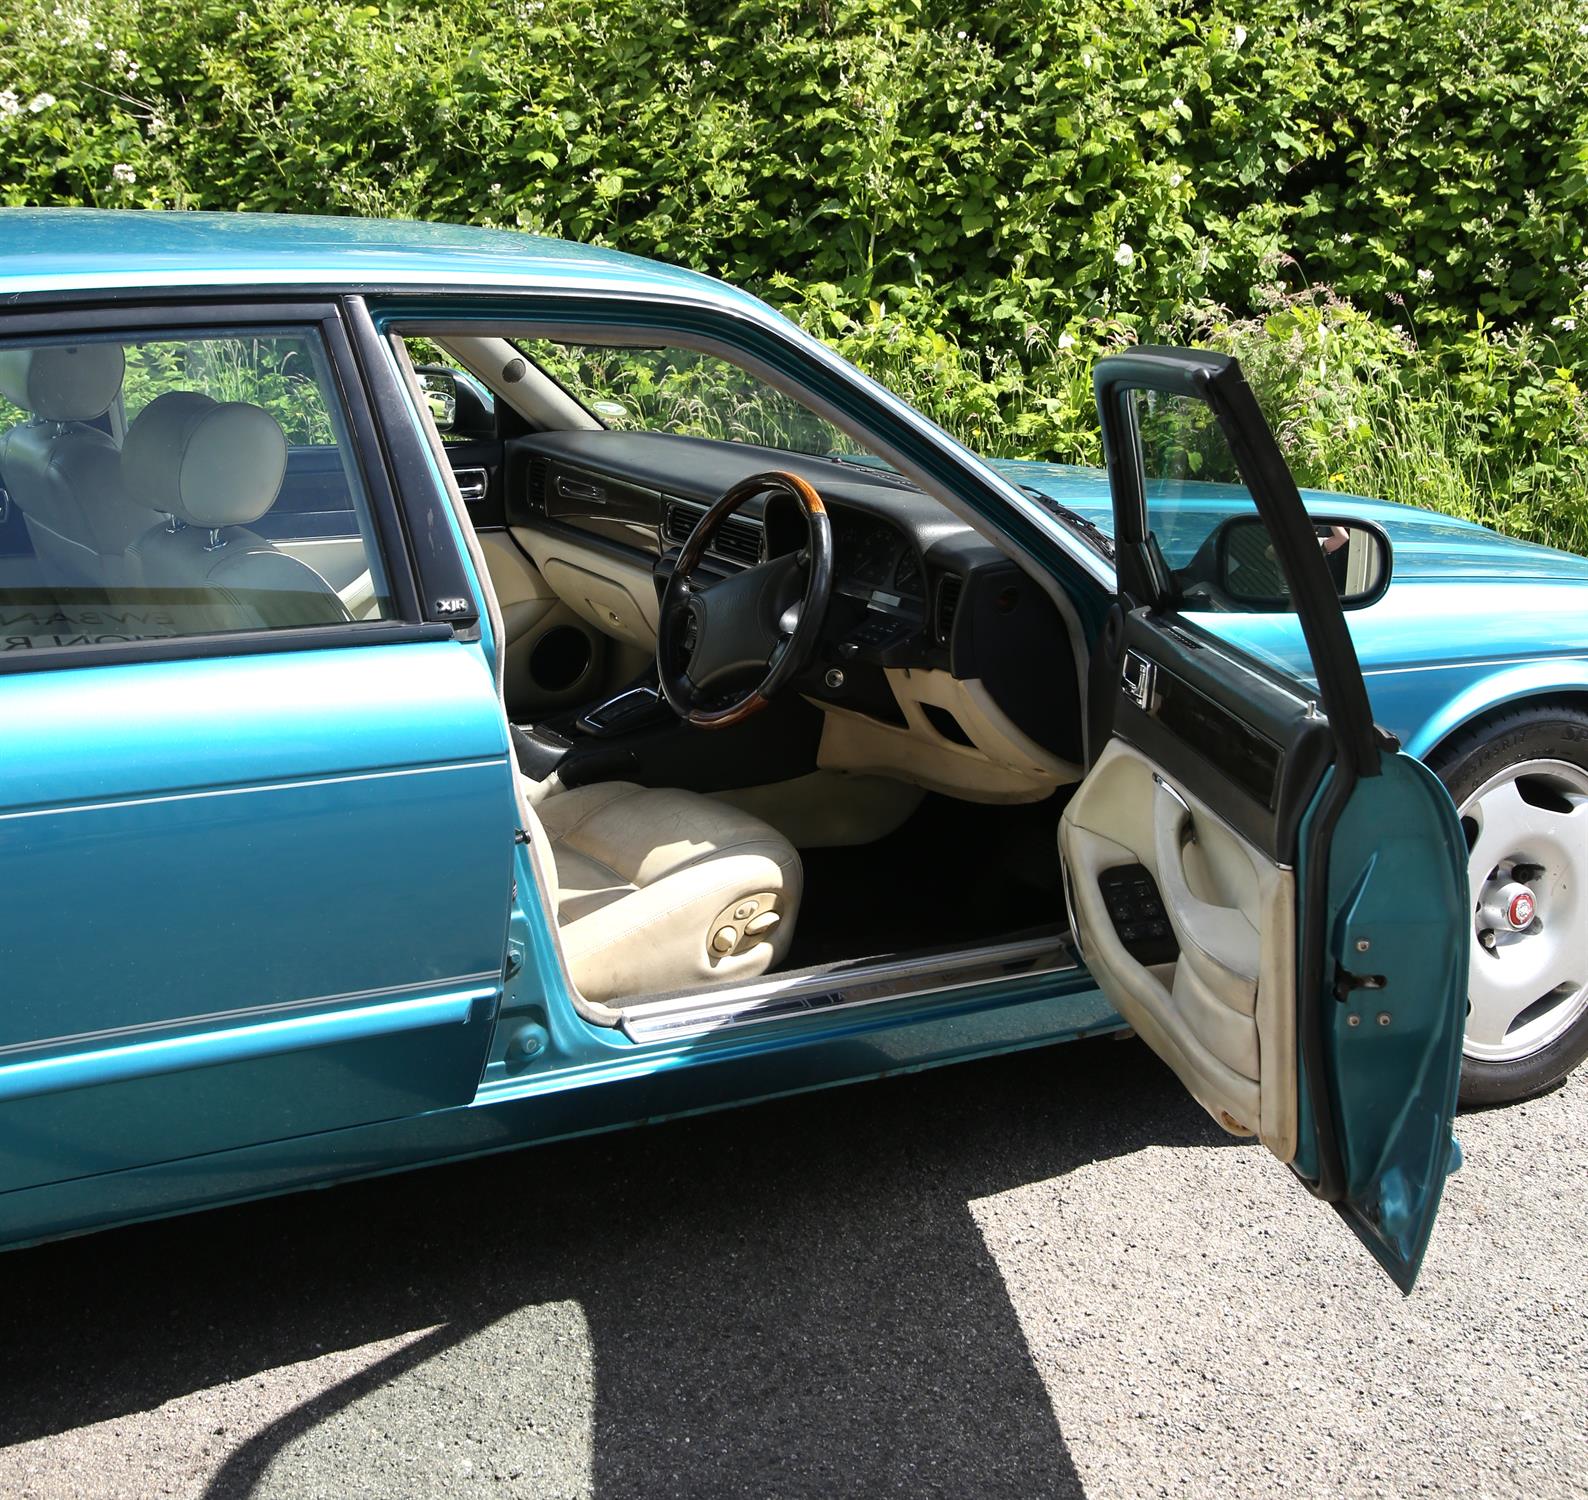 1995 Jaguar XJR Automatic, registration number M857 TBU. - With fitted extras and history file. - Image 7 of 9